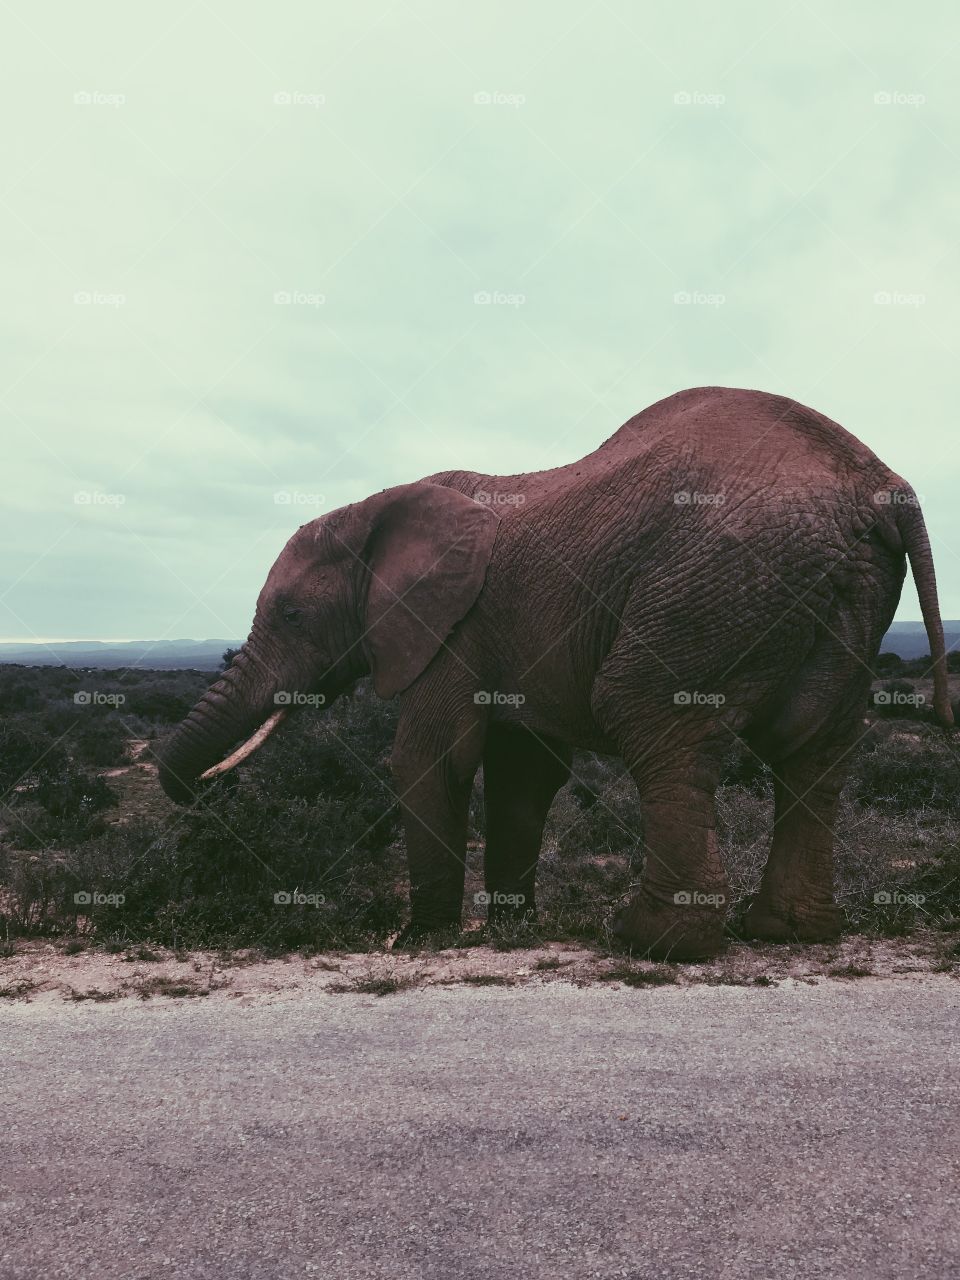 Elephant at Addo national park 